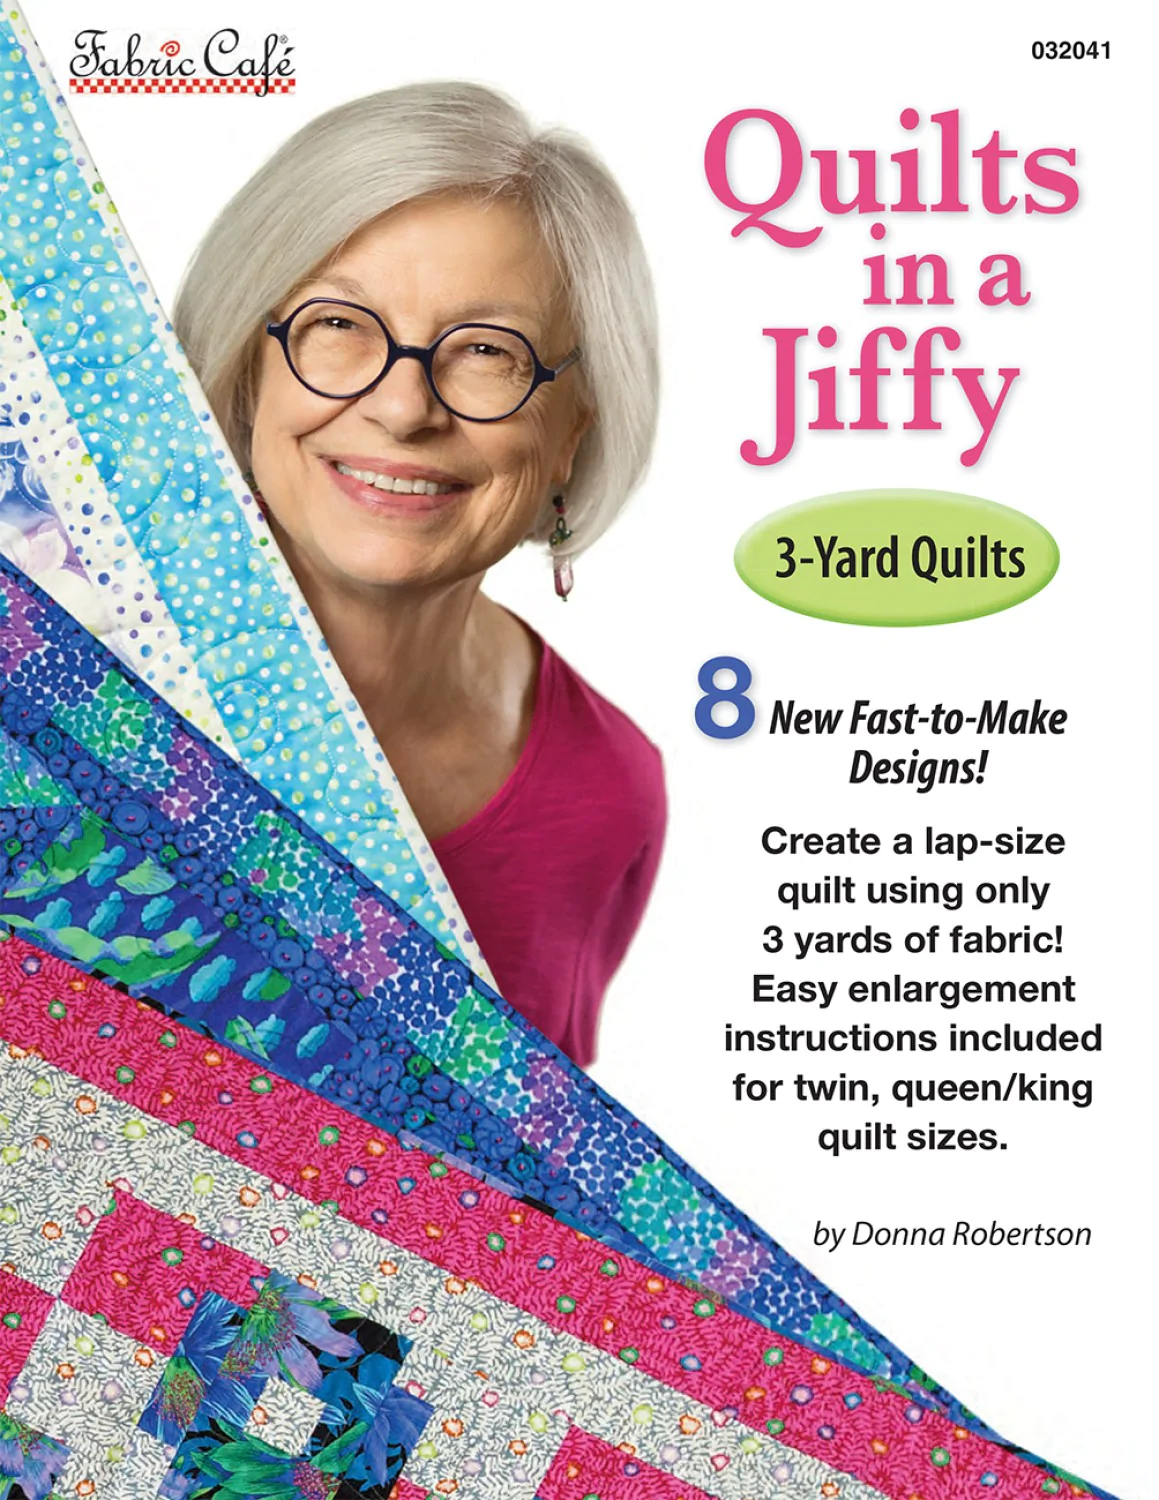 Quilts in a Jiffy 3-Yard Quilts Pattern Book